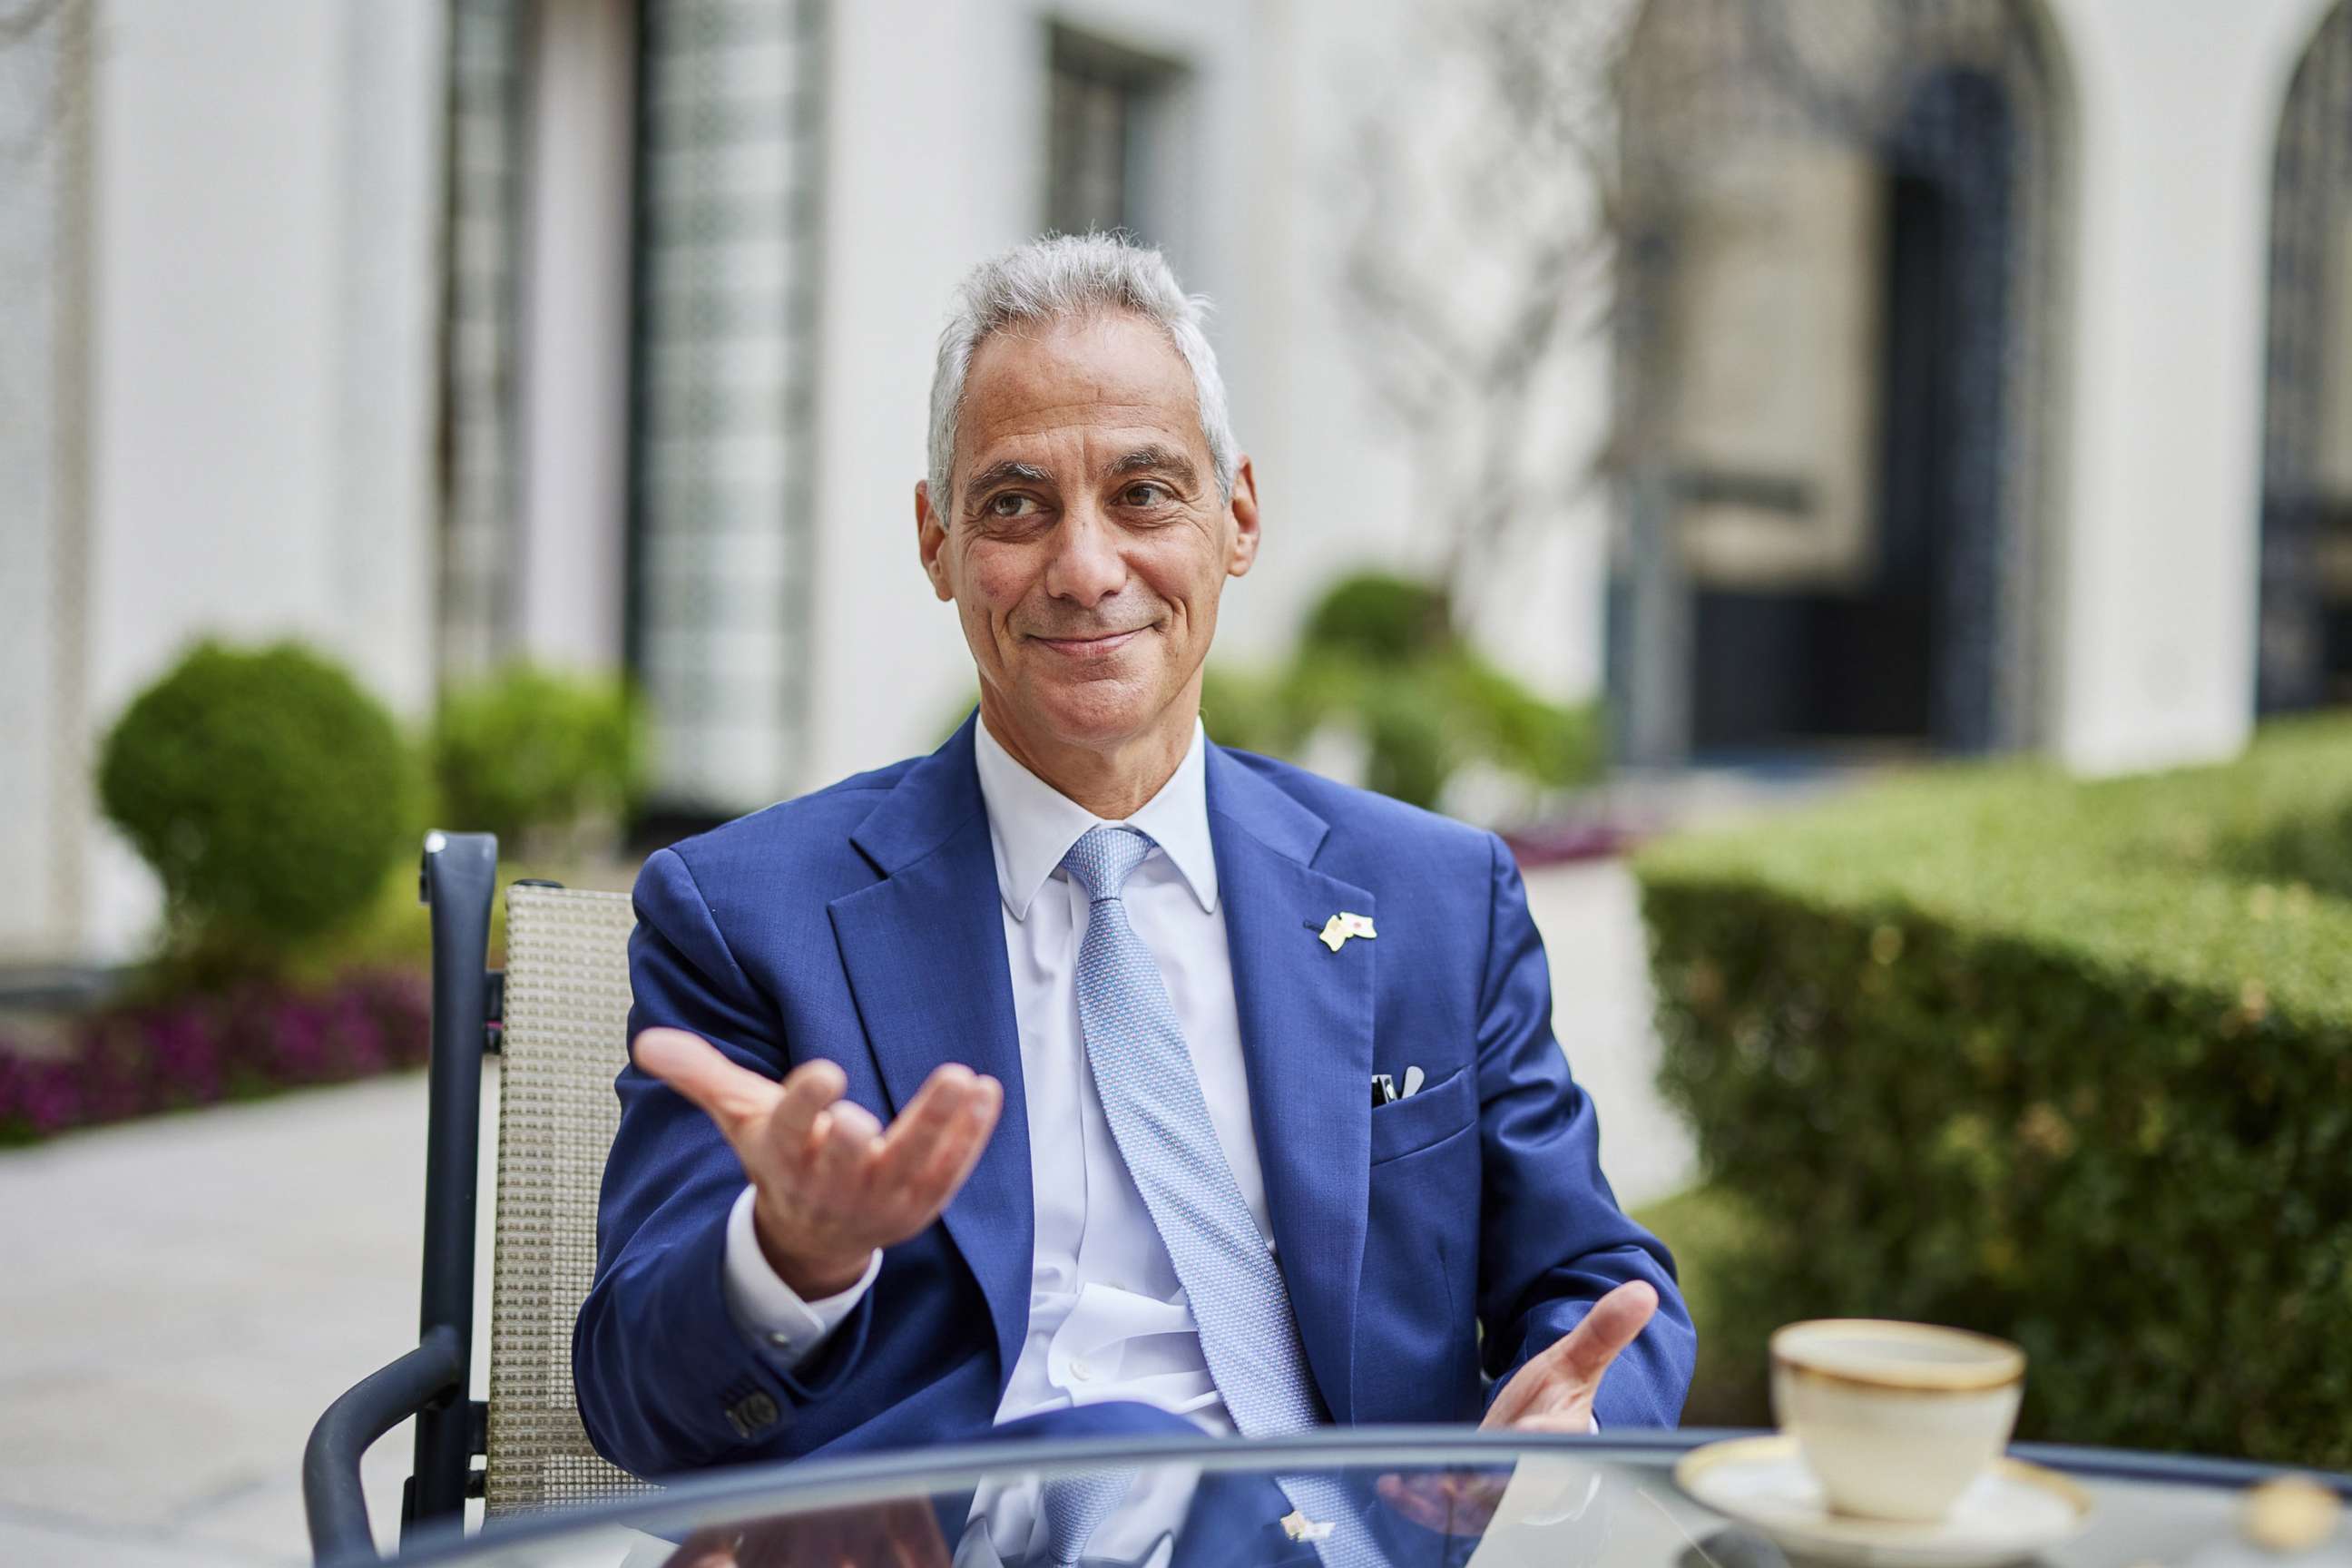 PHOTO: Rahm Emanuel, U.S. Ambassador to Japan, during an interview in Tokyo, March 17, 2022. 